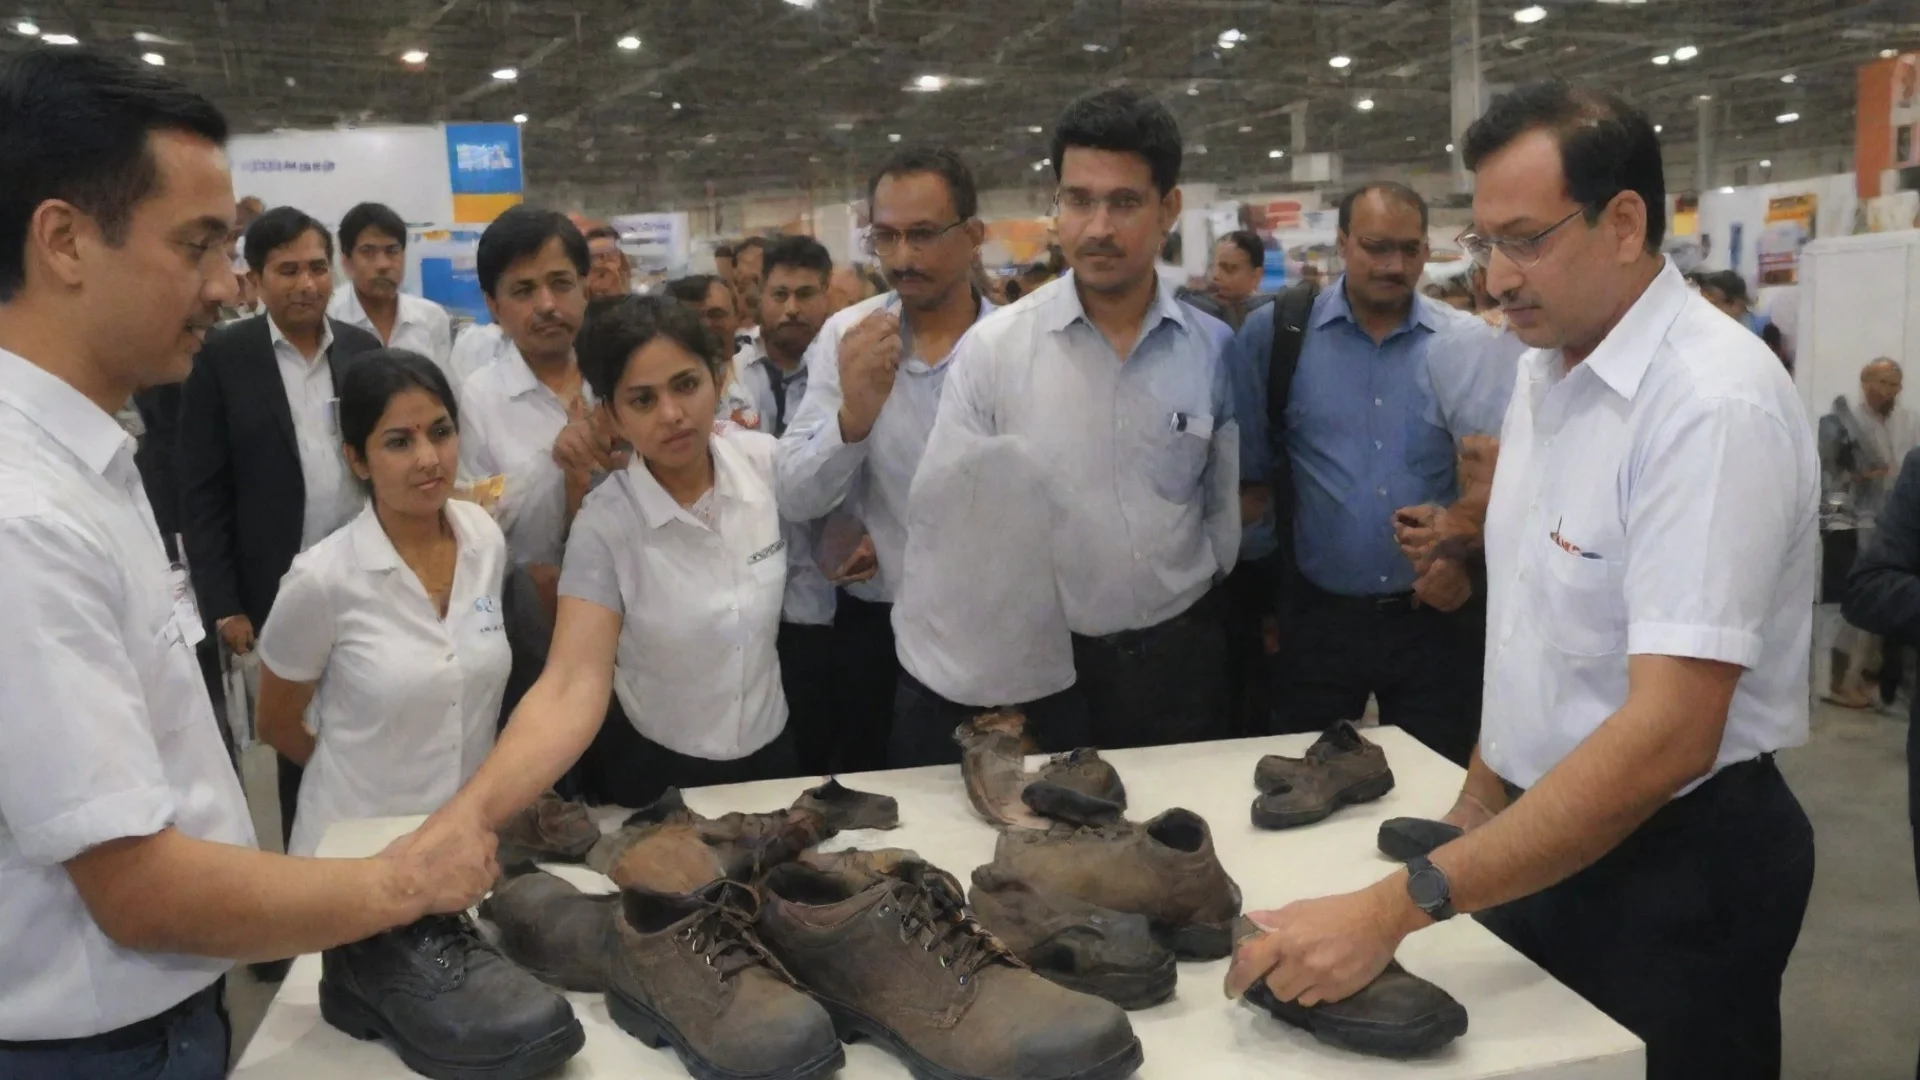 amazing a safety footwear company staff showing there new safety shoes in an industrial expo to the people who visited there expo near there stall where safety shoes are kept awesome portrait 2 wide